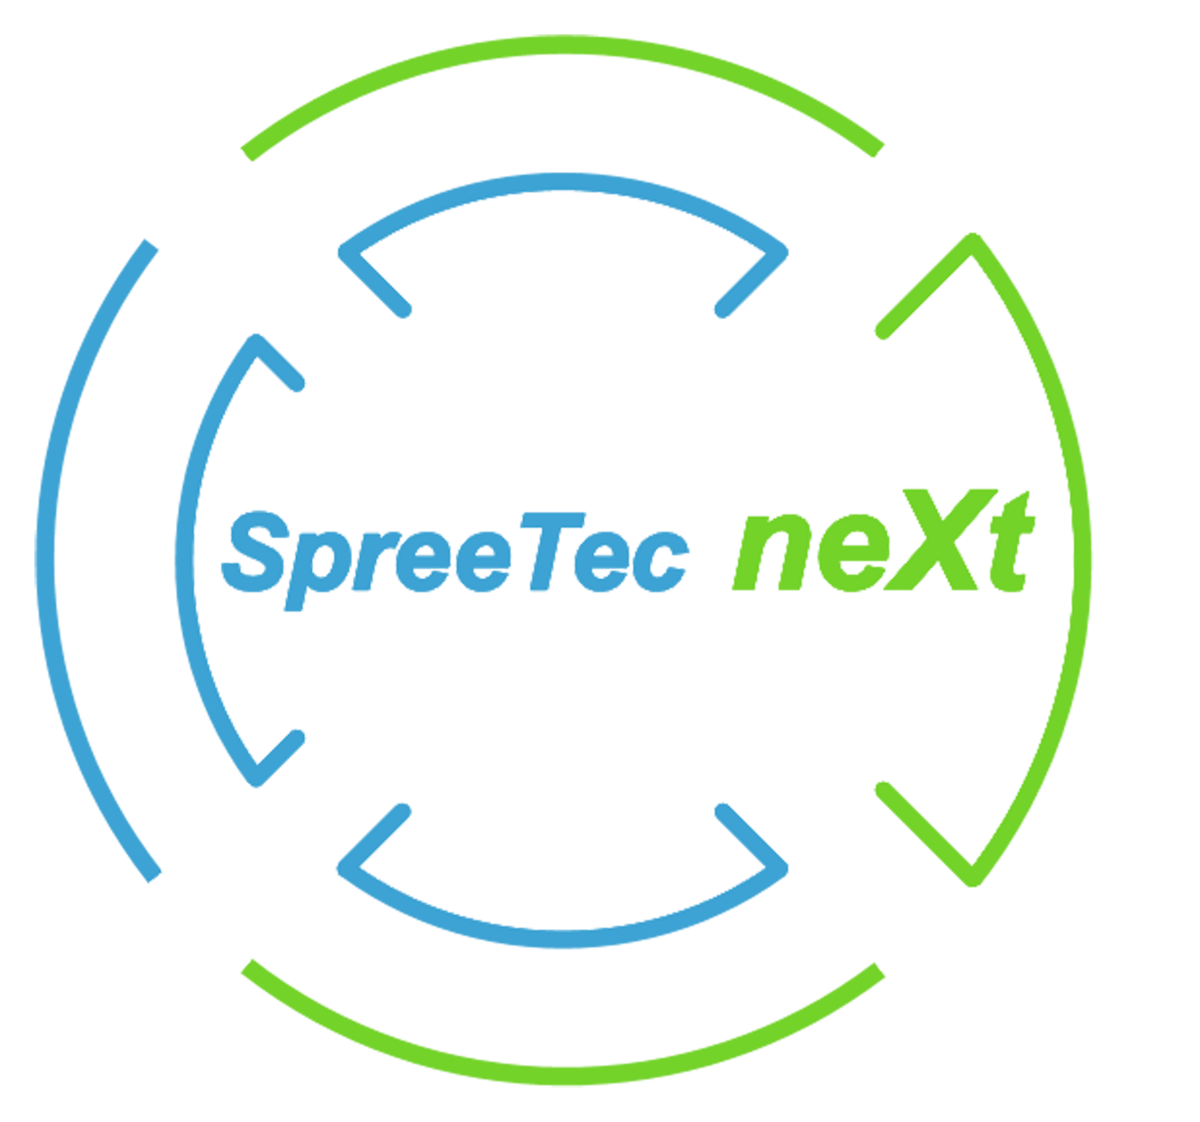 Logo for the joint project Spreetec neXt